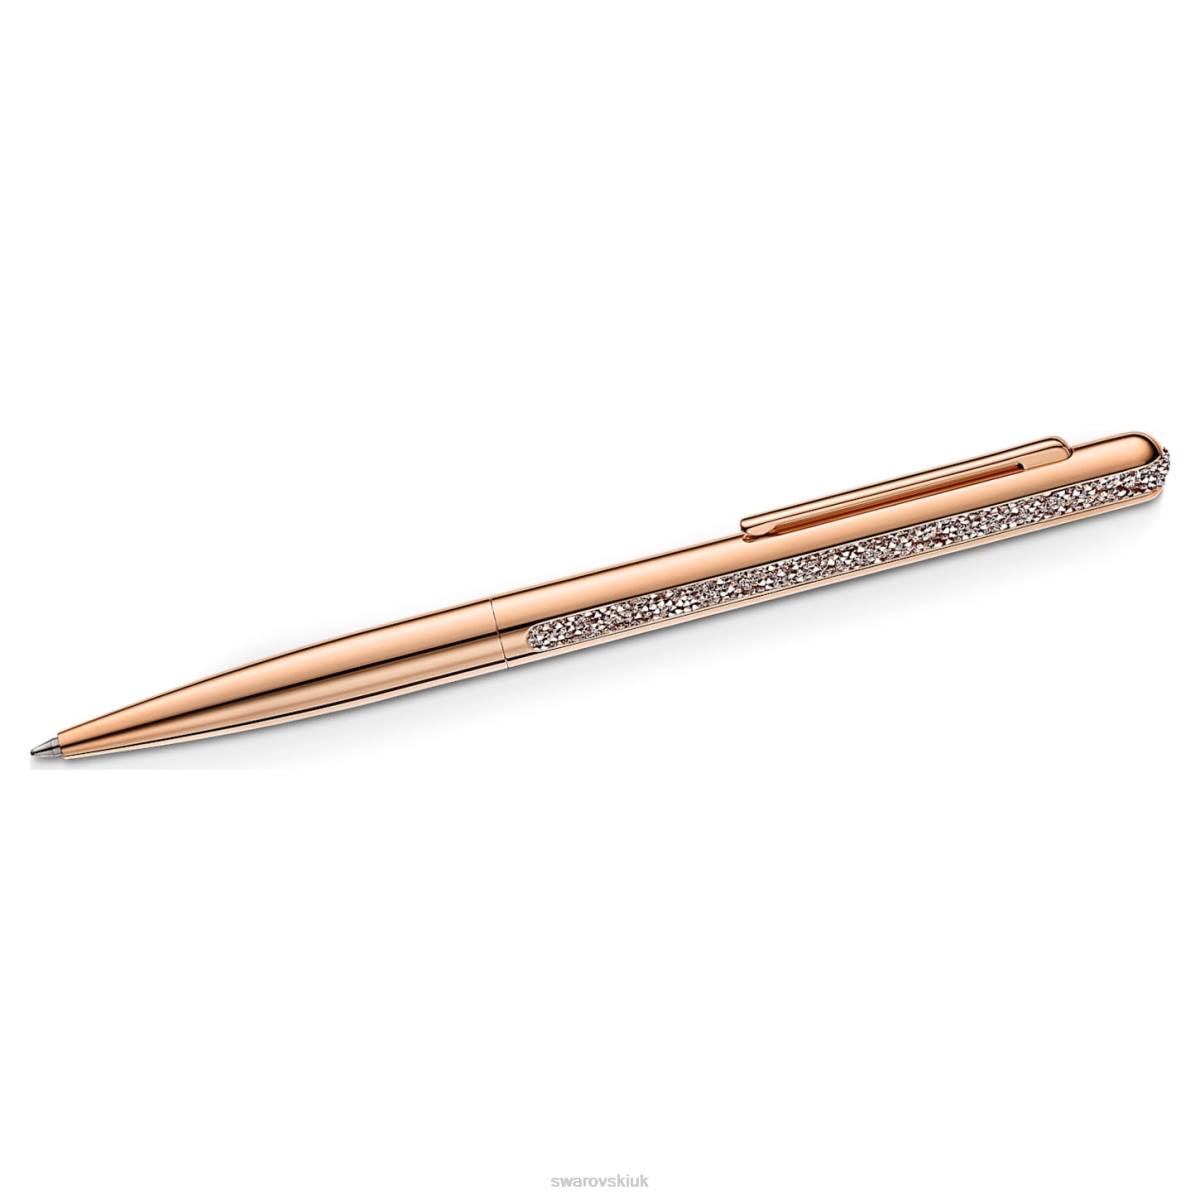 Accessories Swarovski Crystal Shimmer ballpoint pen Rose gold tone, Rose gold-tone plated 48JX1272